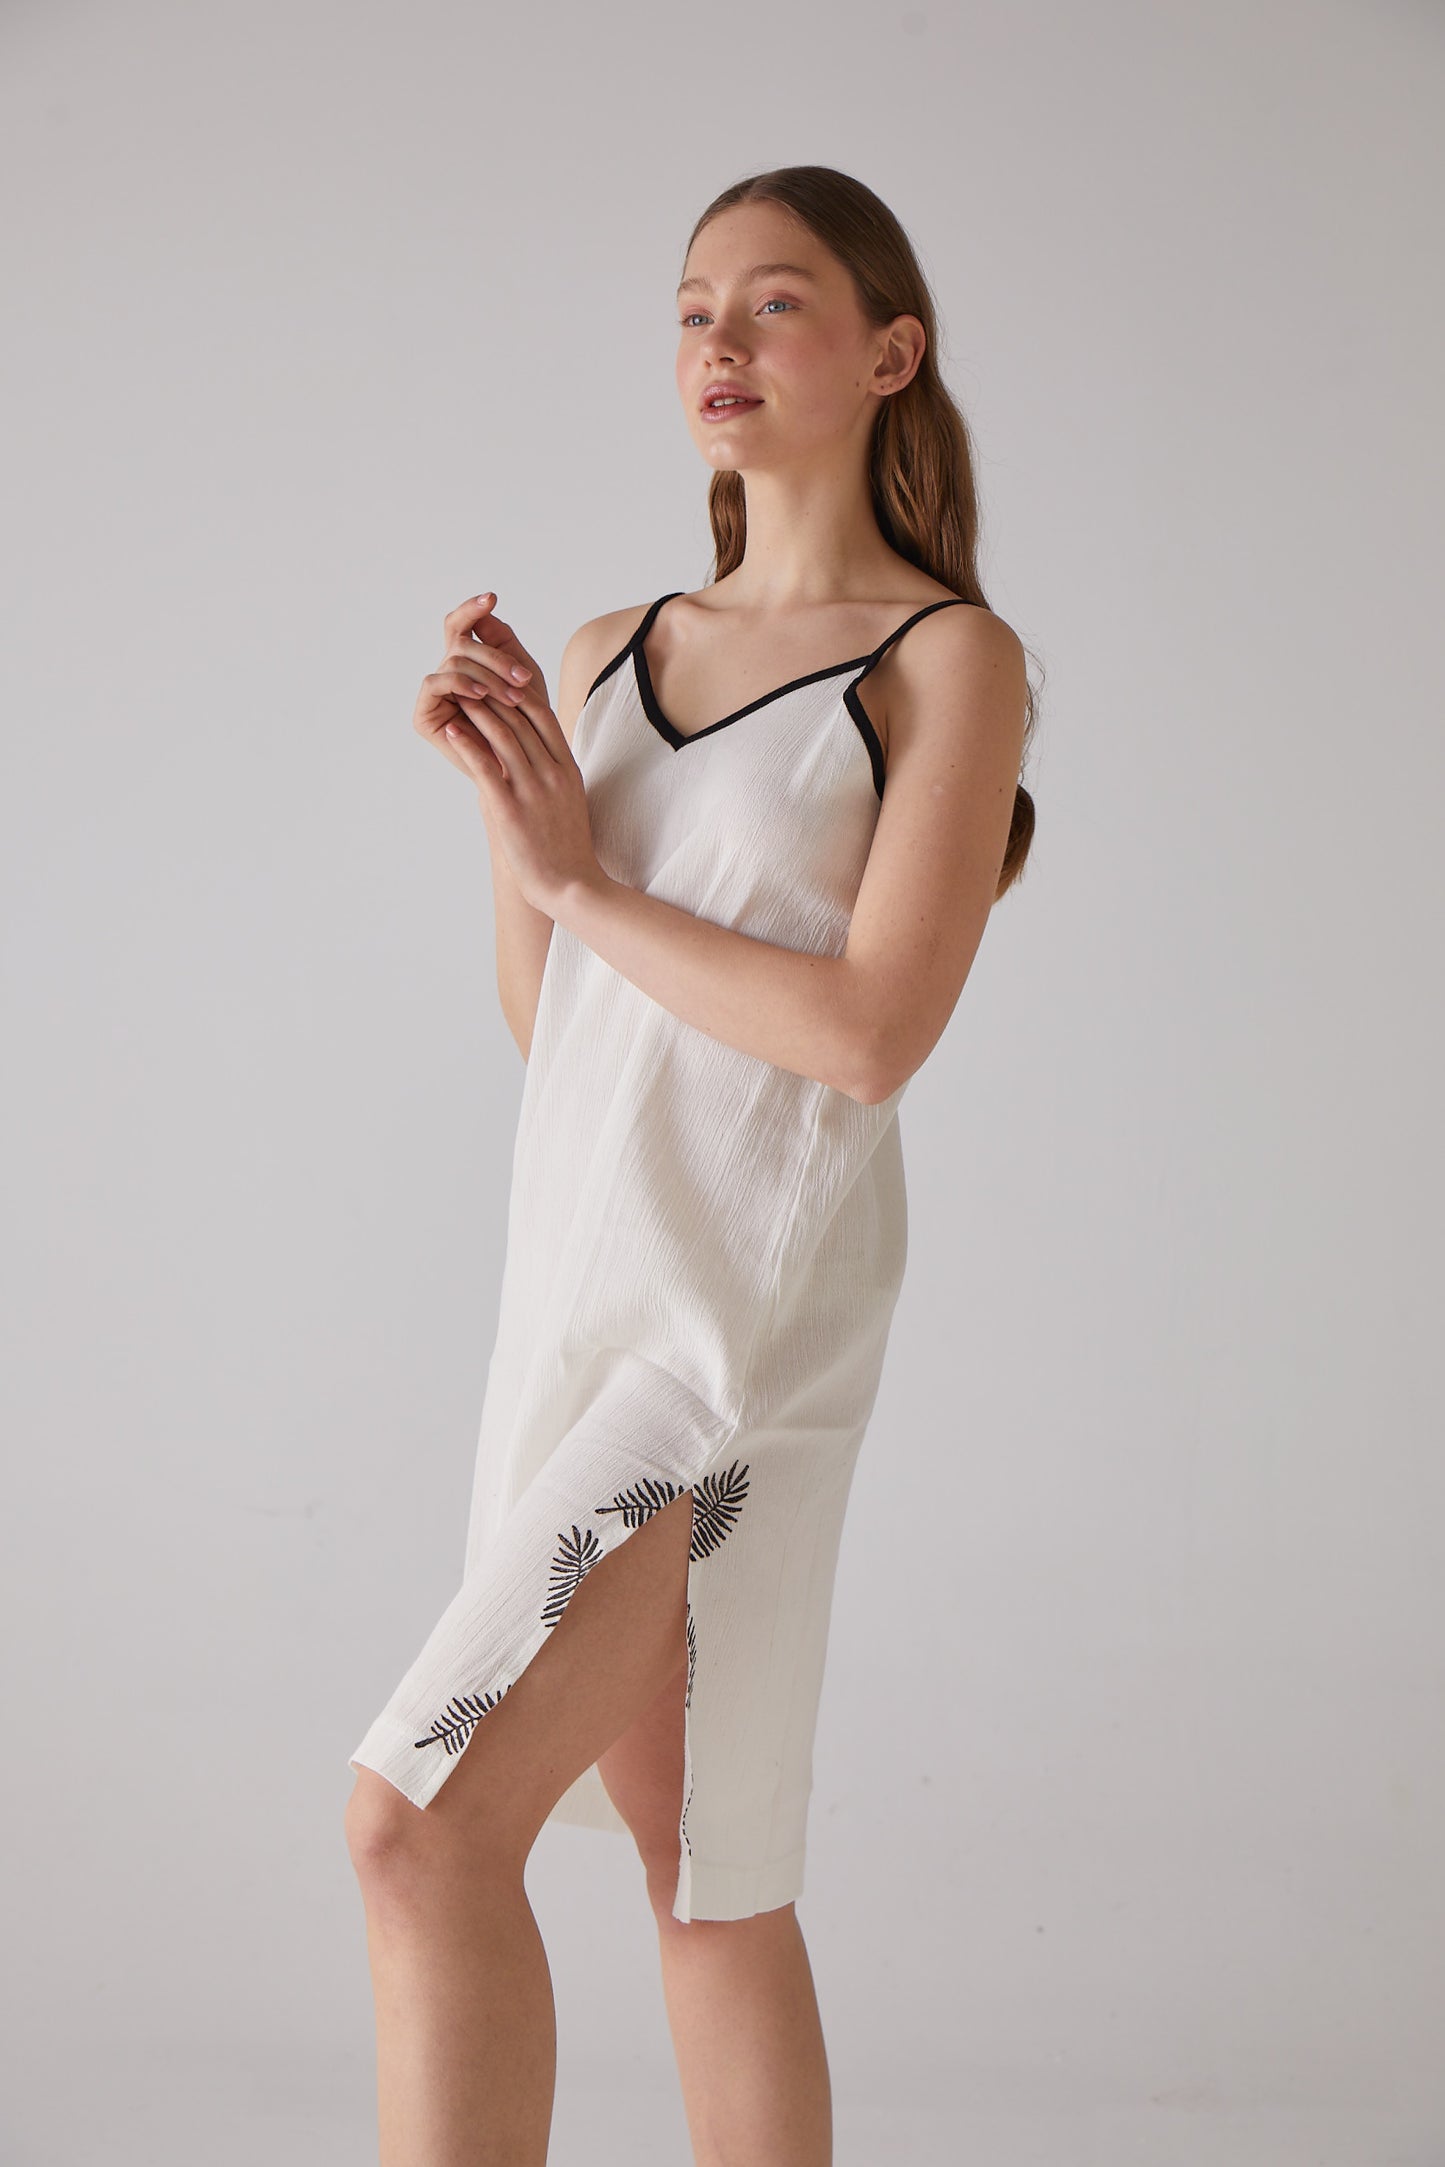 Leaf woodcut patterned Strappy nightgown in white 100% organic cotton